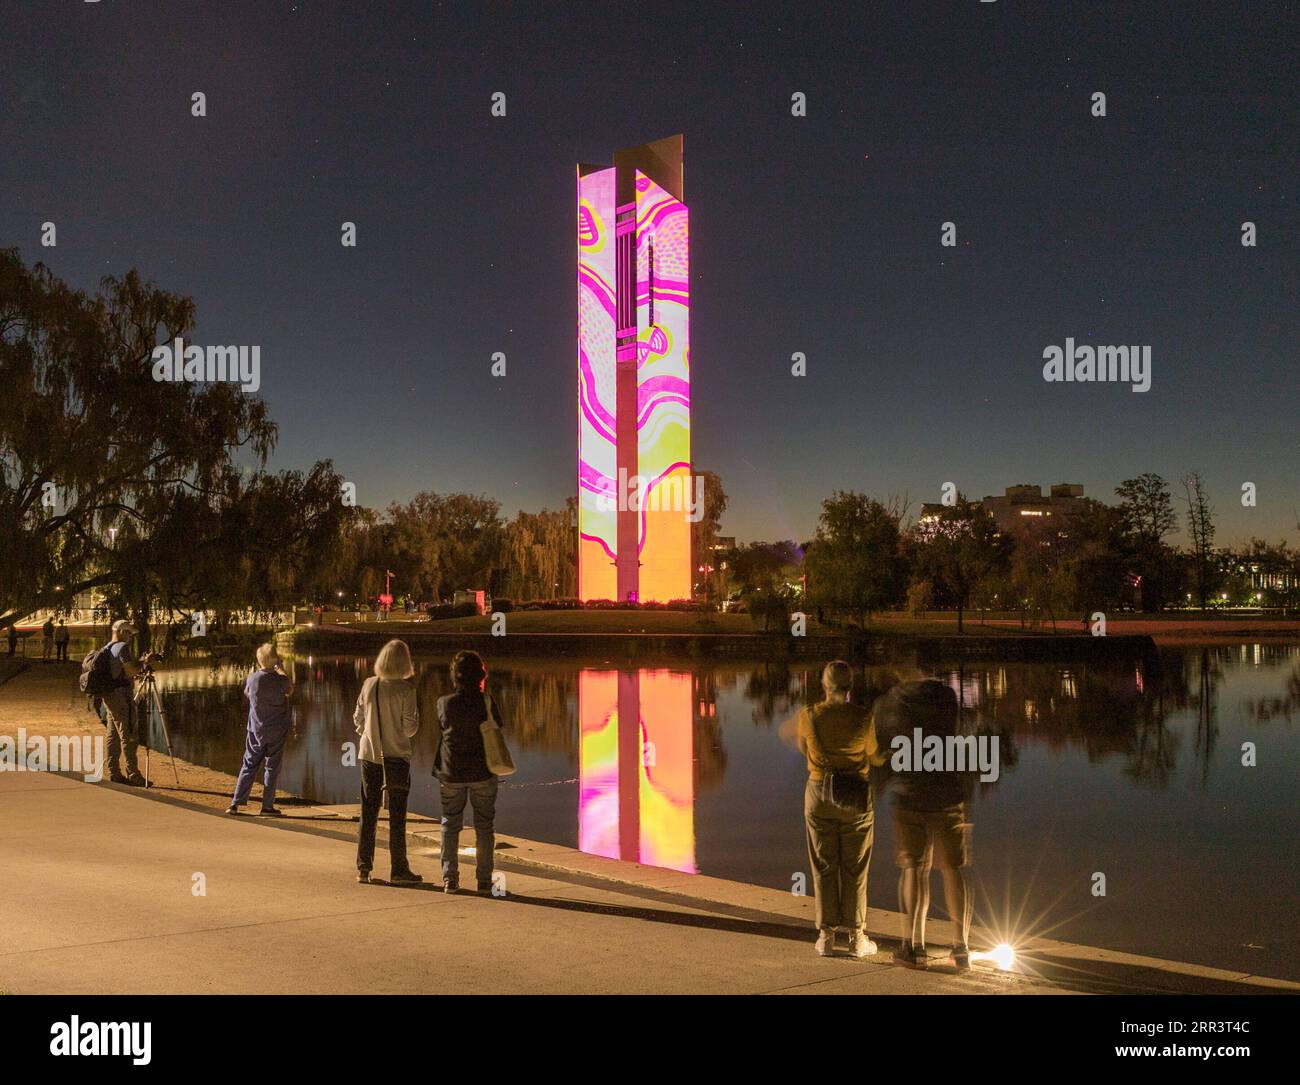 201111 -- CANBERRA, Nov. 11, 2020 -- People watch the light projections on the National Carillon in Canberra, Australia, Nov. 10, 2020. The National Carillon is illuminated with a series of indigenous artworks and designs from Aboriginal and Torres Strait Islander artists from Nov. 8 to 15. Photo by /Xinhua AUSTRALIA-CANBERRA-NATIONAL CARILLON-PROJECTIONS LiuxChangchang PUBLICATIONxNOTxINxCHN Stock Photo